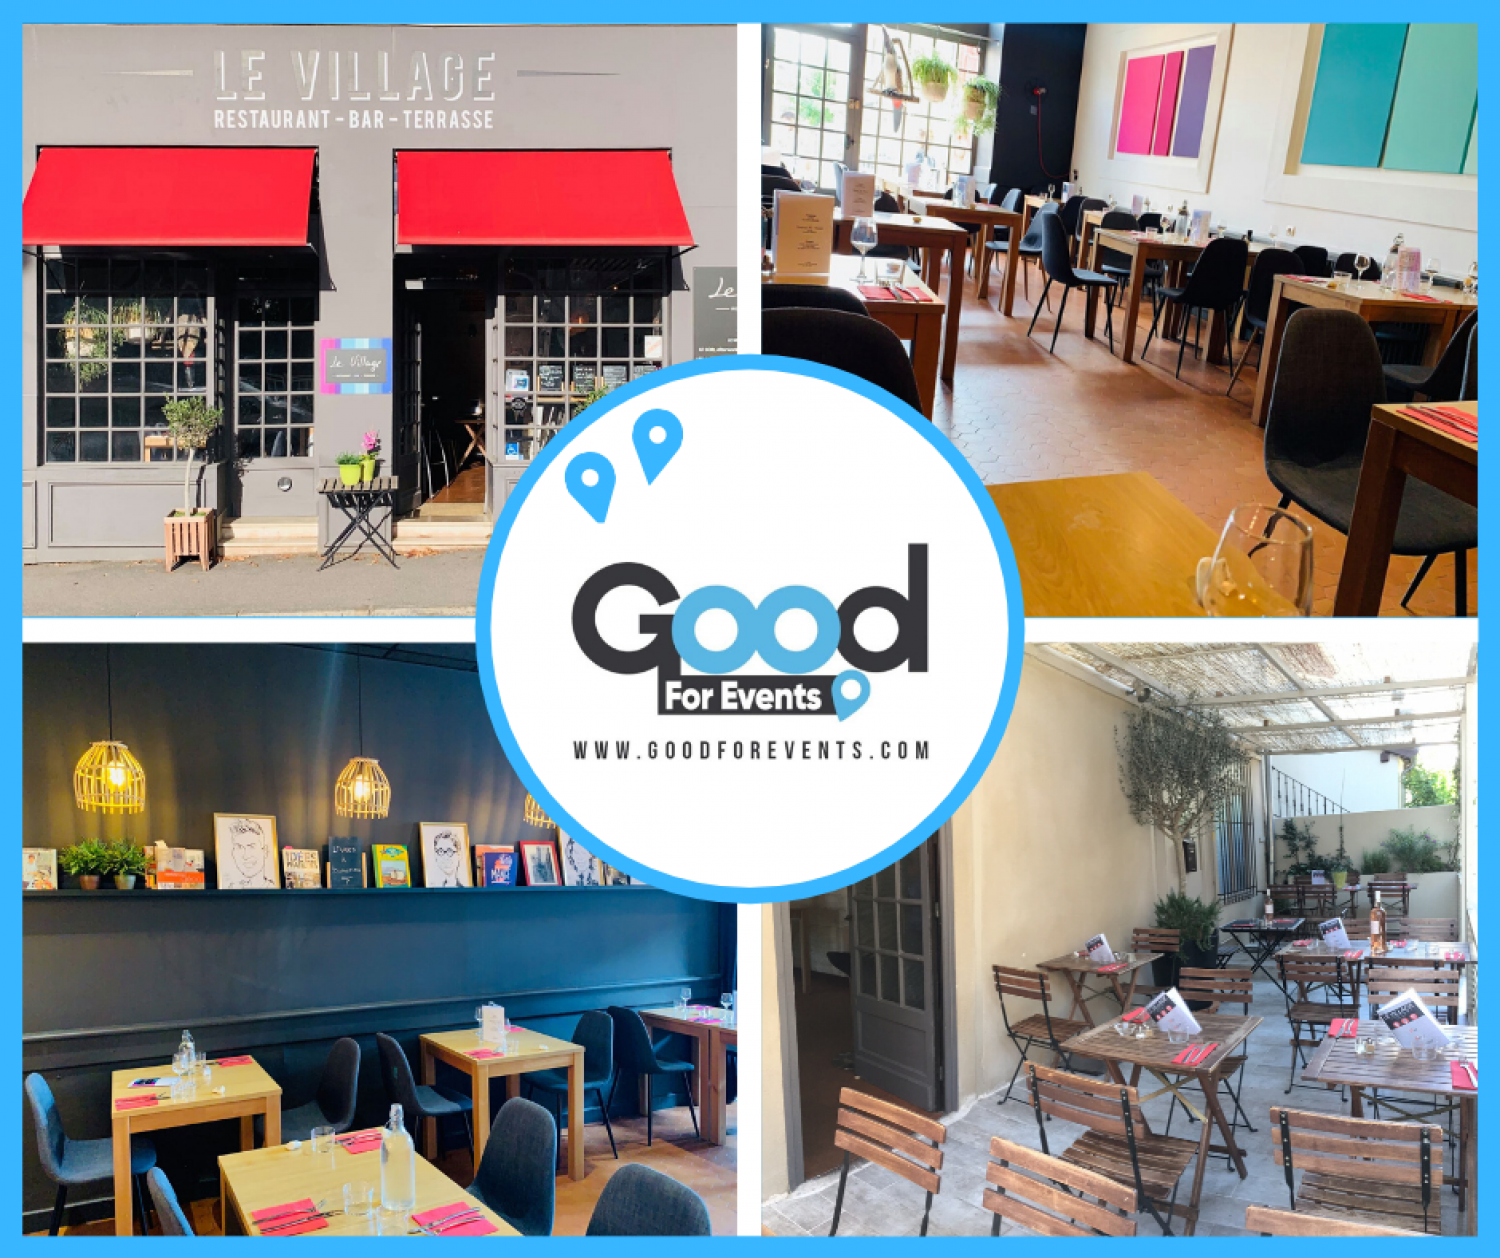 article good for events - Restaurant Le Village à Ecully